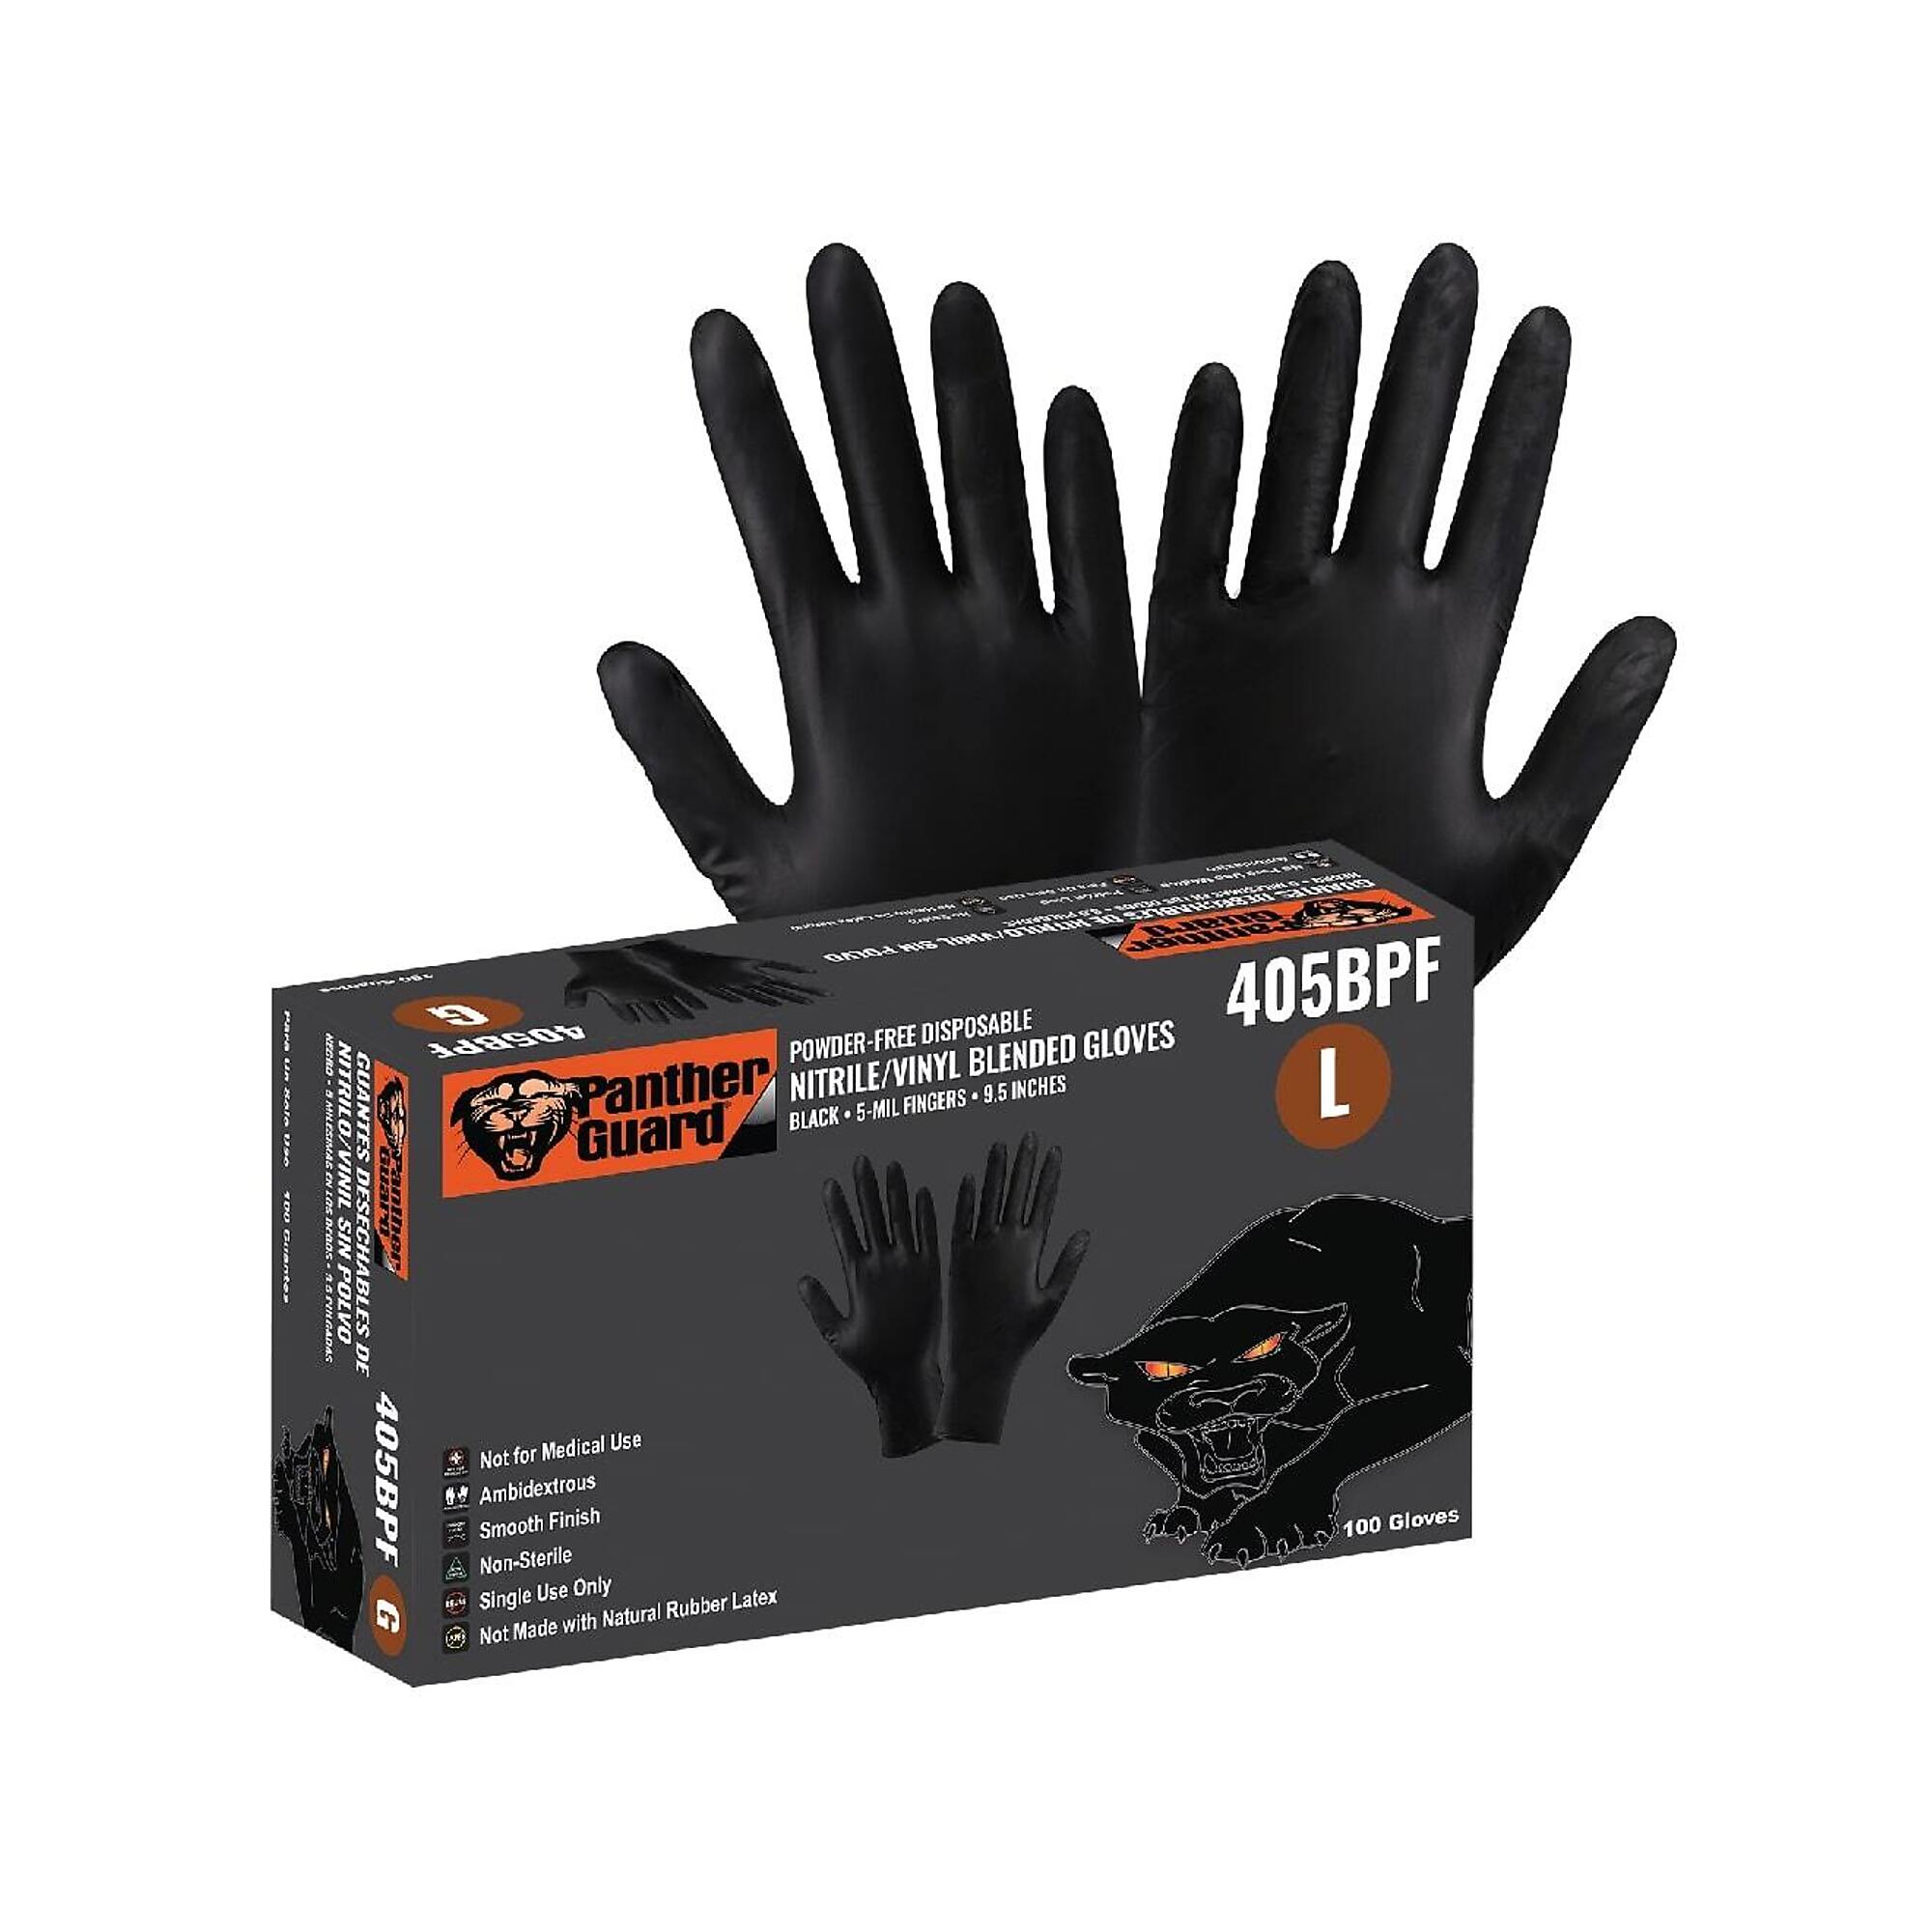 Global Glove Panther-Guard , 5-Mil, 9.5Inch, Black Nitrile/Vinyl, Smooth Finish - 500 Pairs, Size M, Color Black, Included (qty.) 1000 Model 405BPF-M